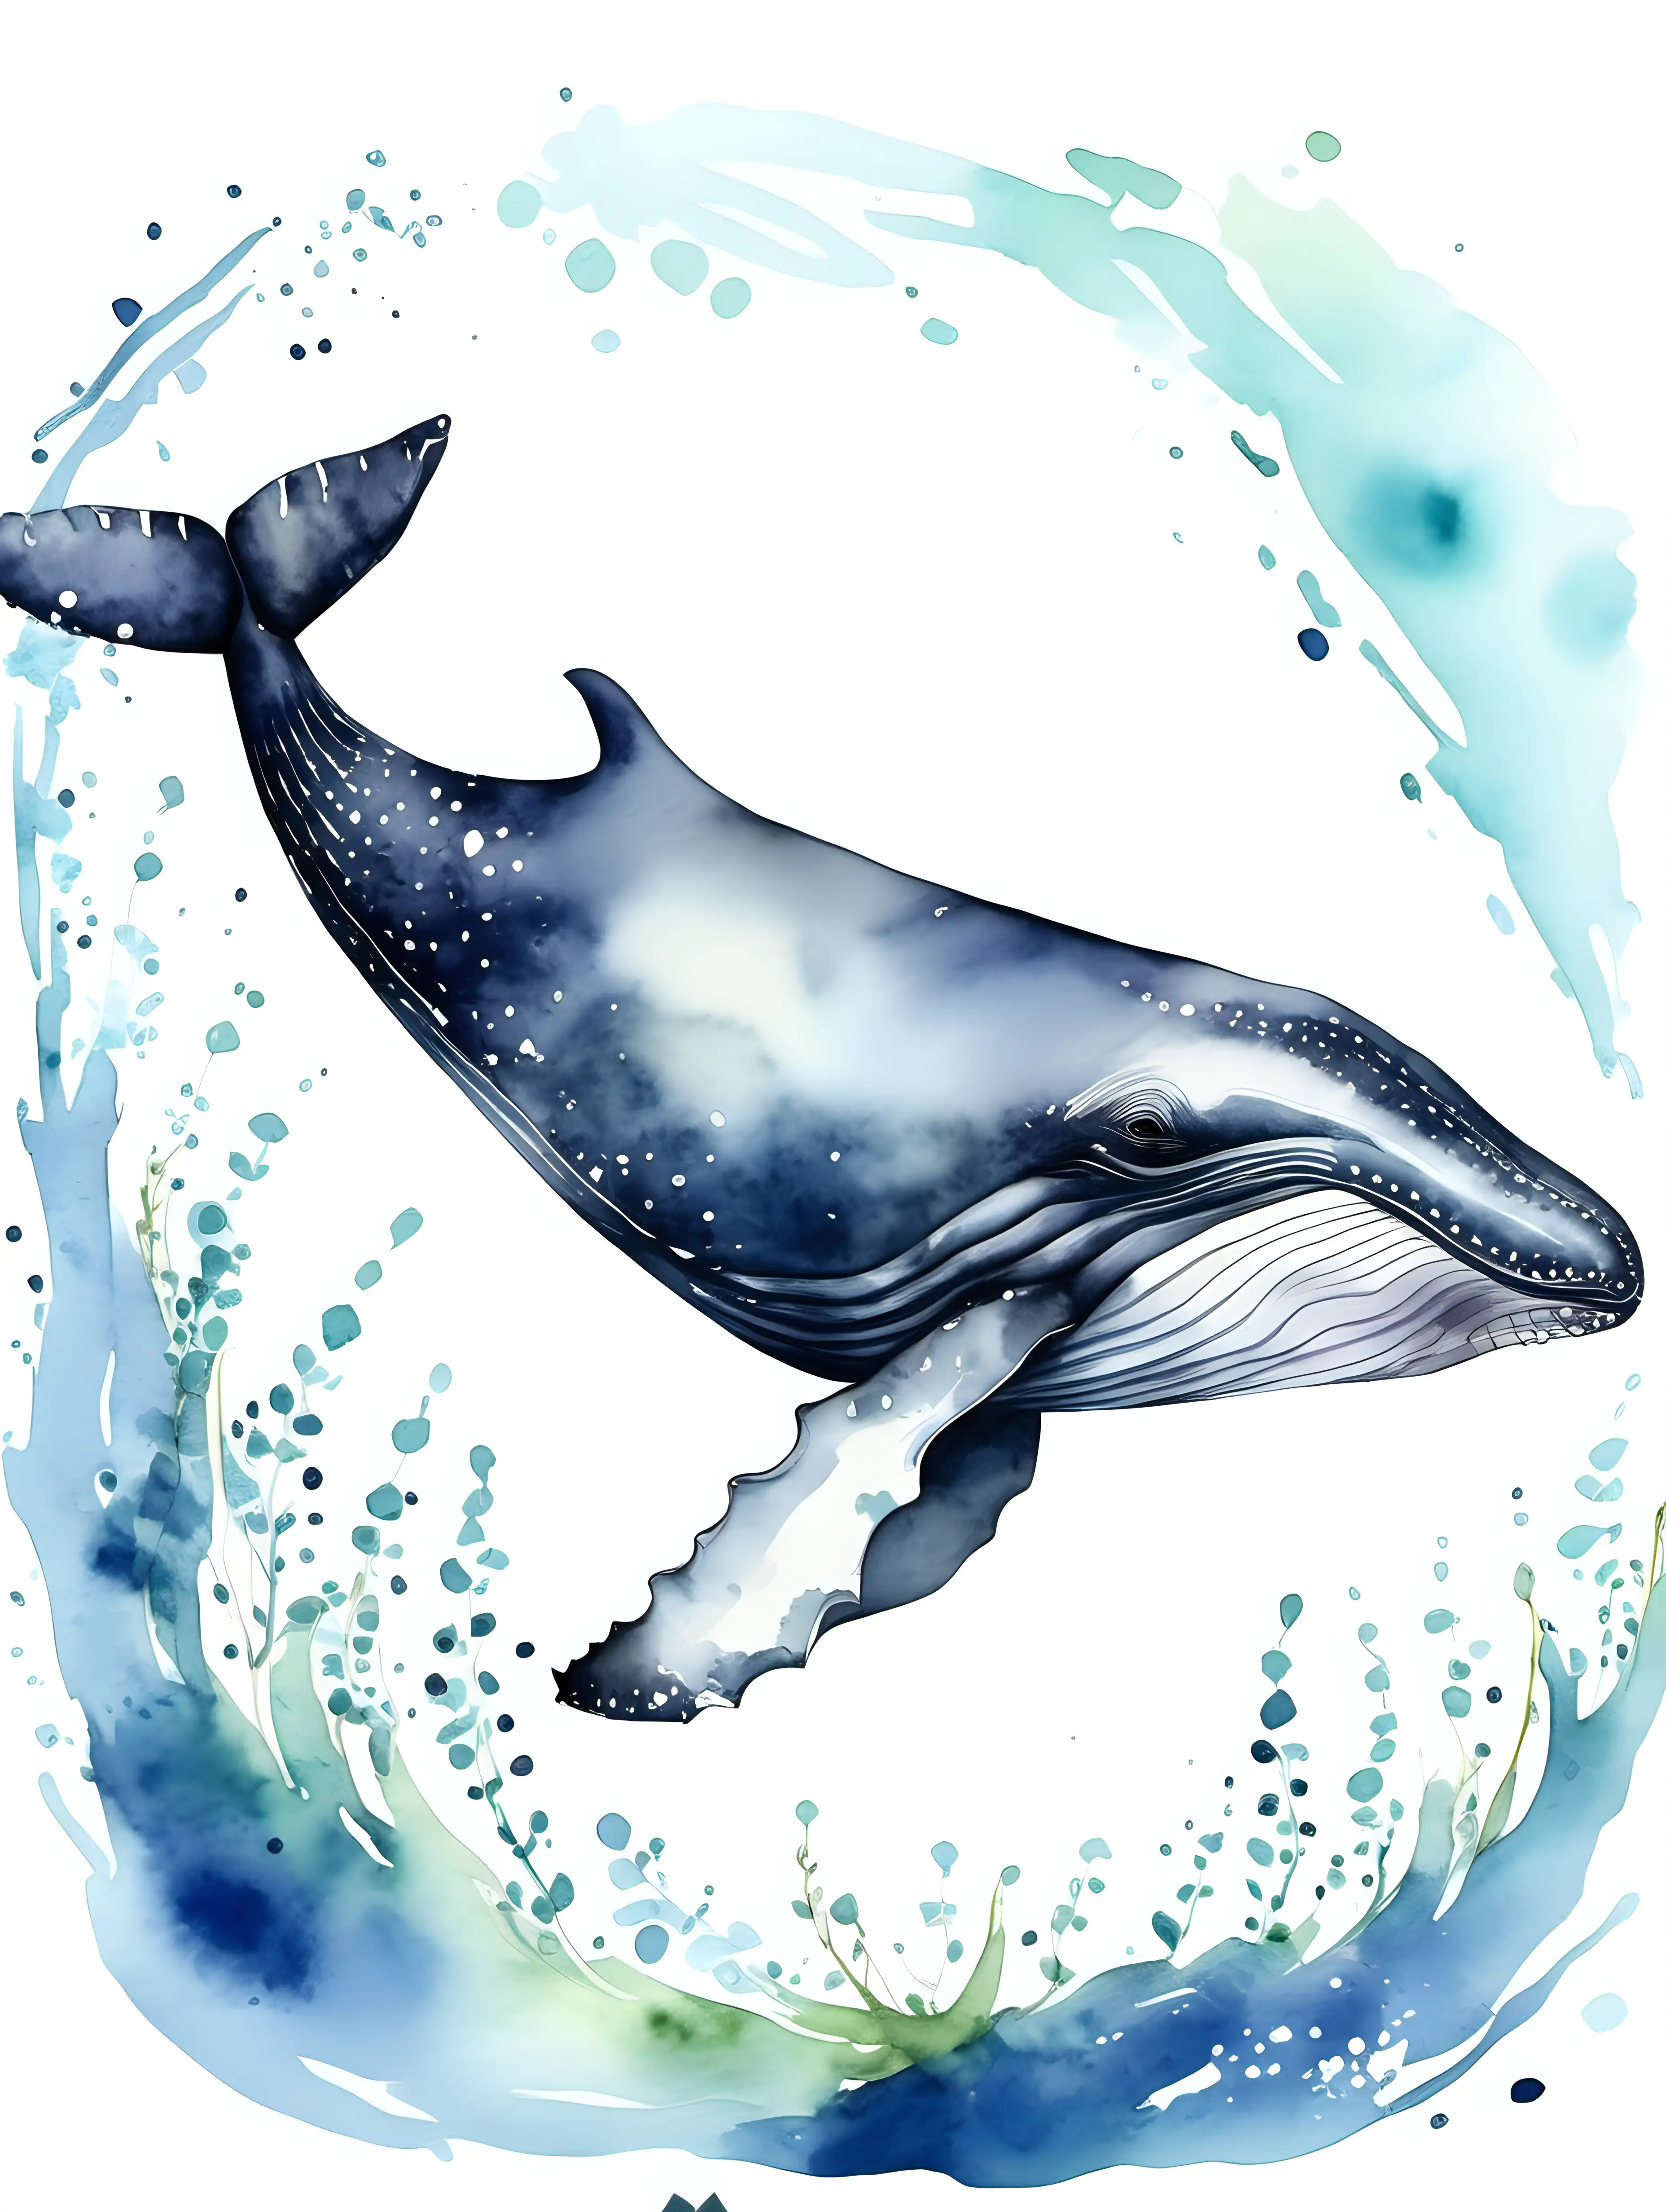 Adorable Baby Humpback Whale Watercolor Illustration